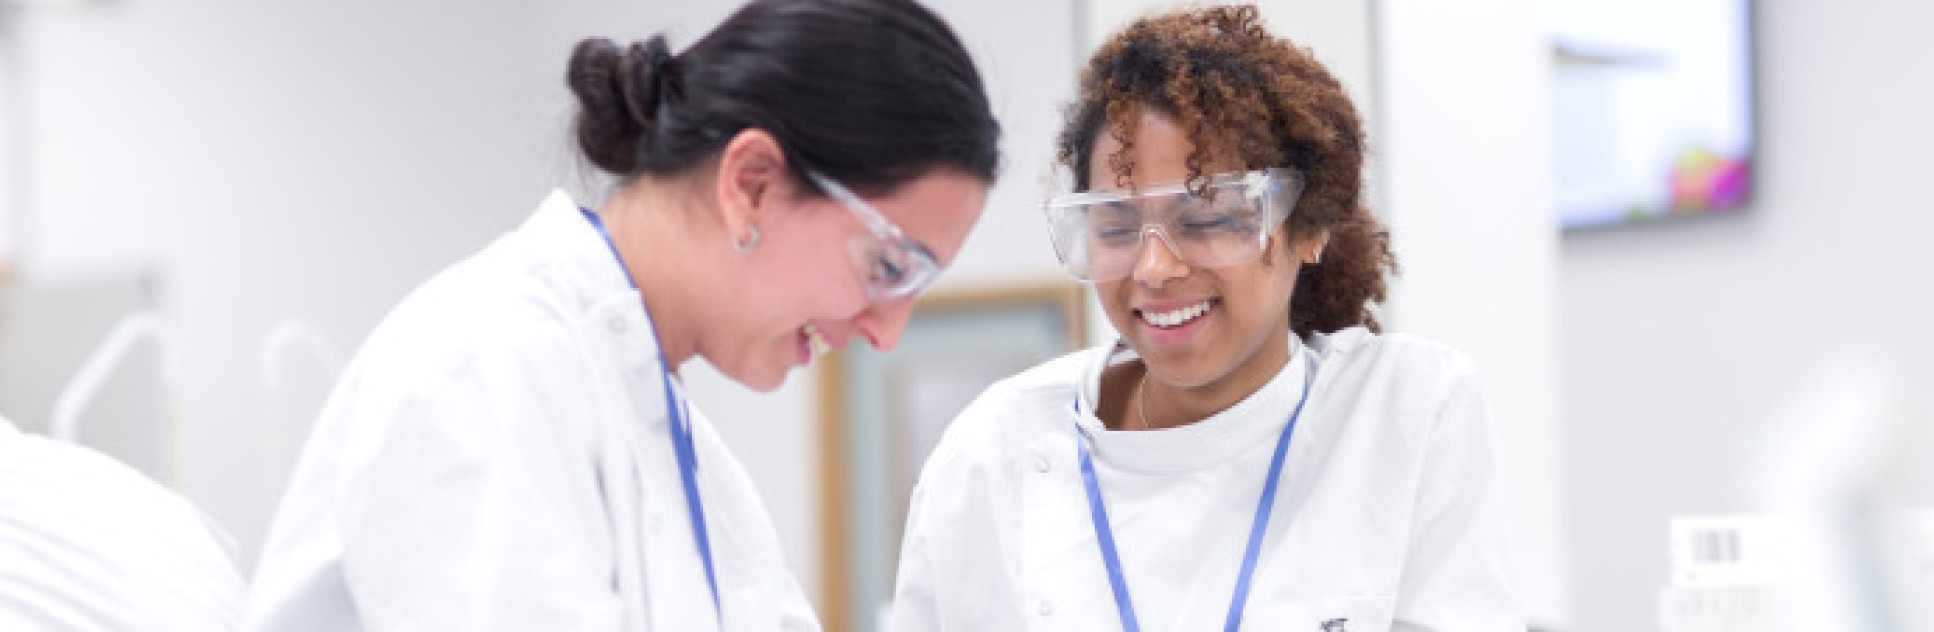 Two women in lab smiling whilst carrying out an experiment